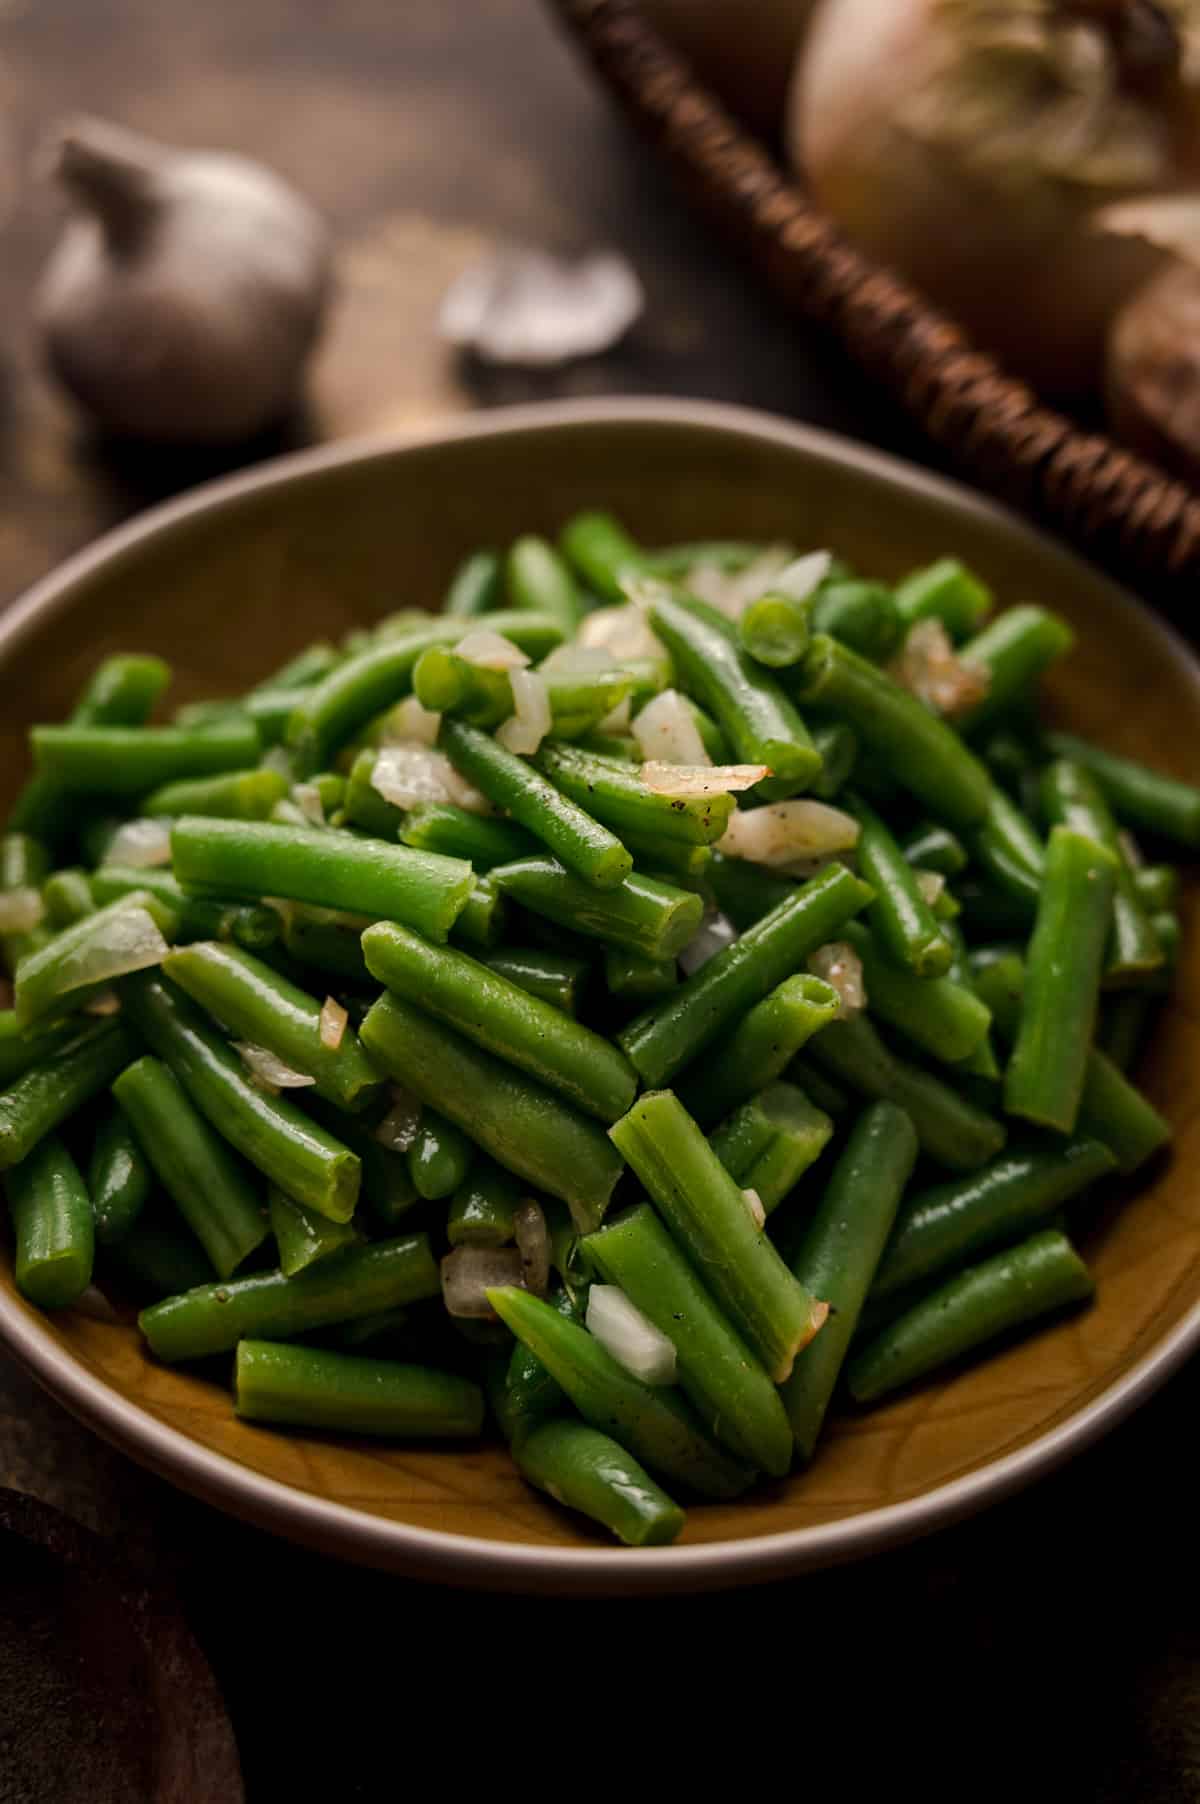 Cooked green beans from a can with sauteed onion garlic and spices.